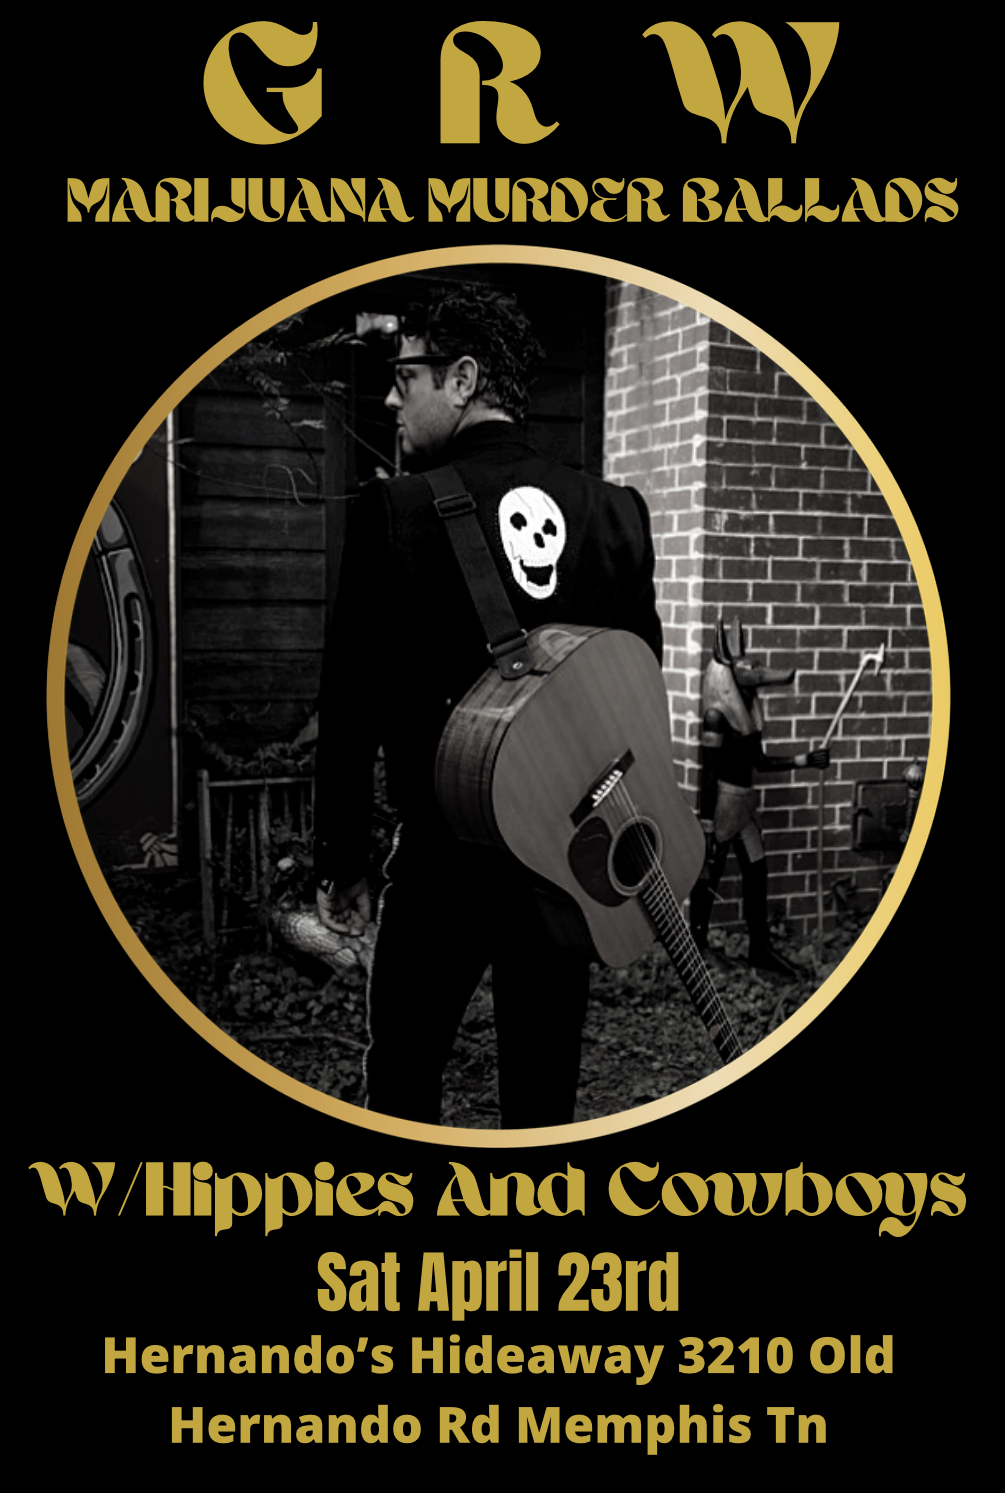 Buy Tickets to GRW w/ Hippies and Cowboys in Memphis on Apr 23, 2022